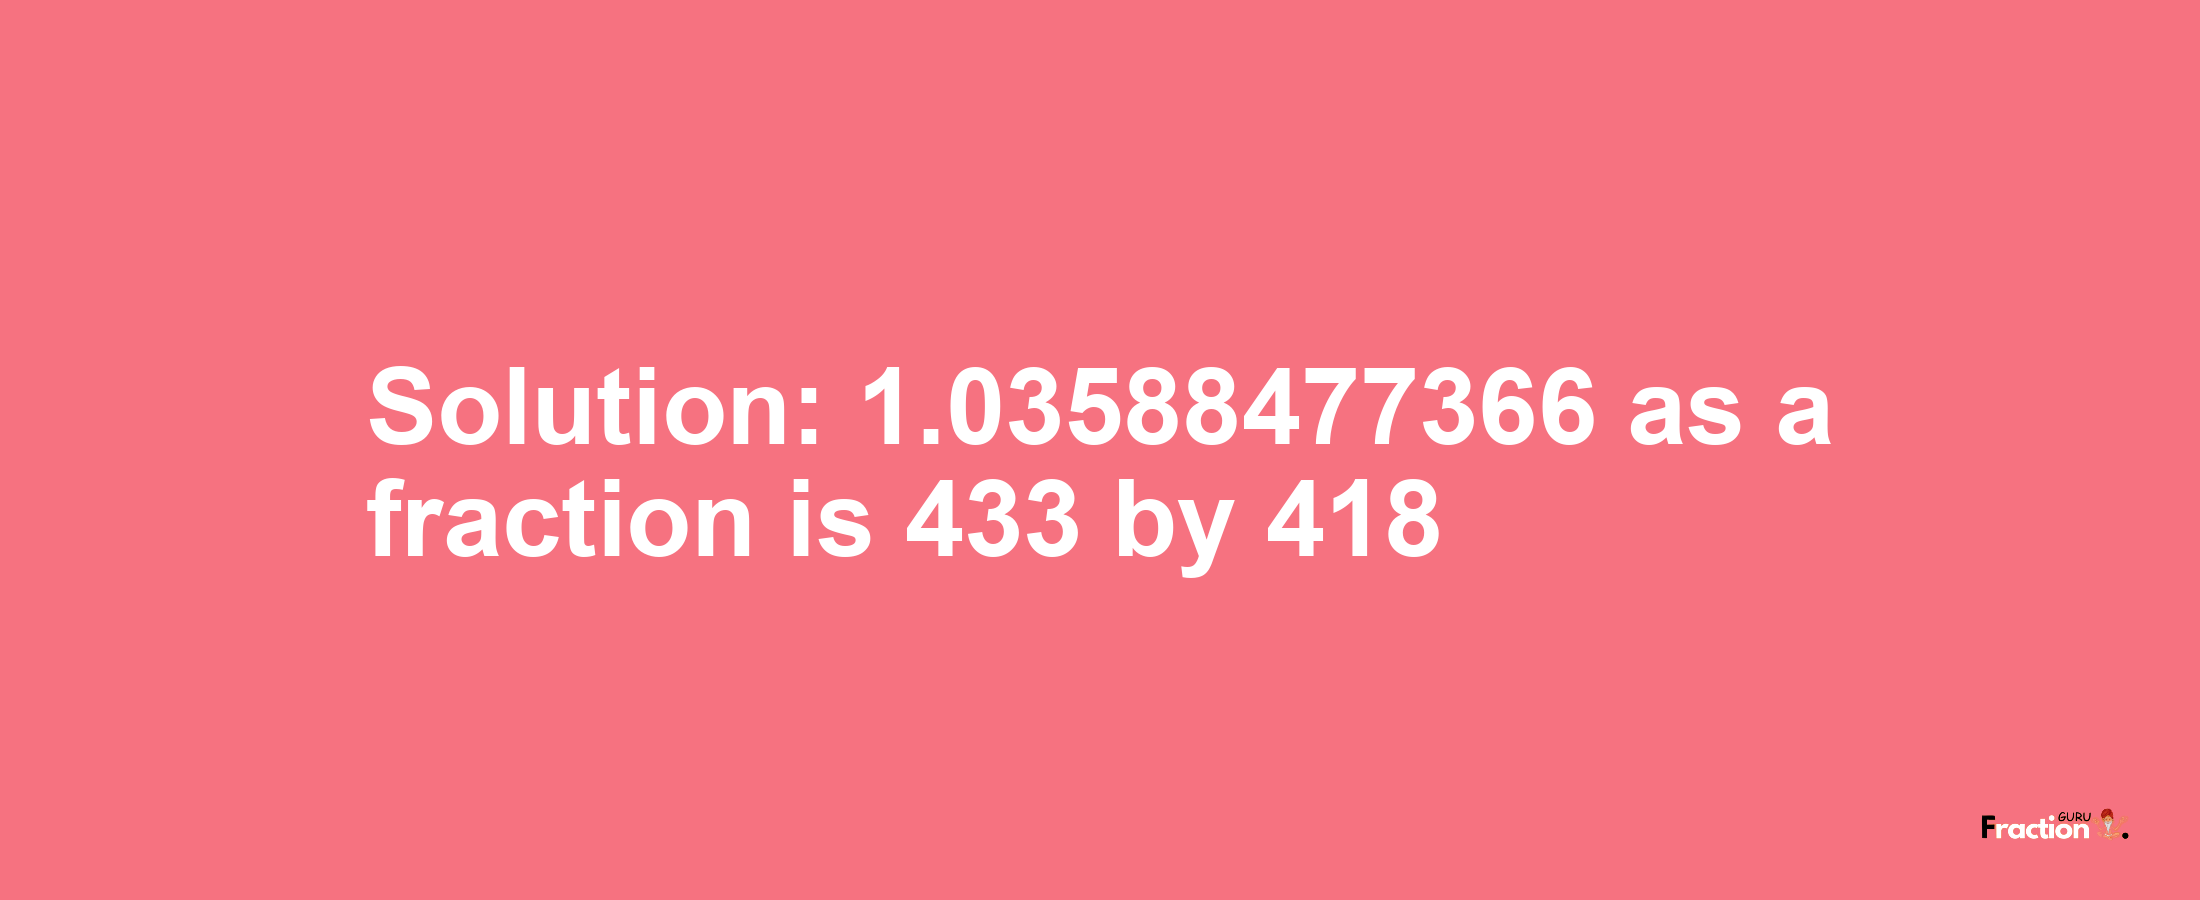 Solution:1.03588477366 as a fraction is 433/418